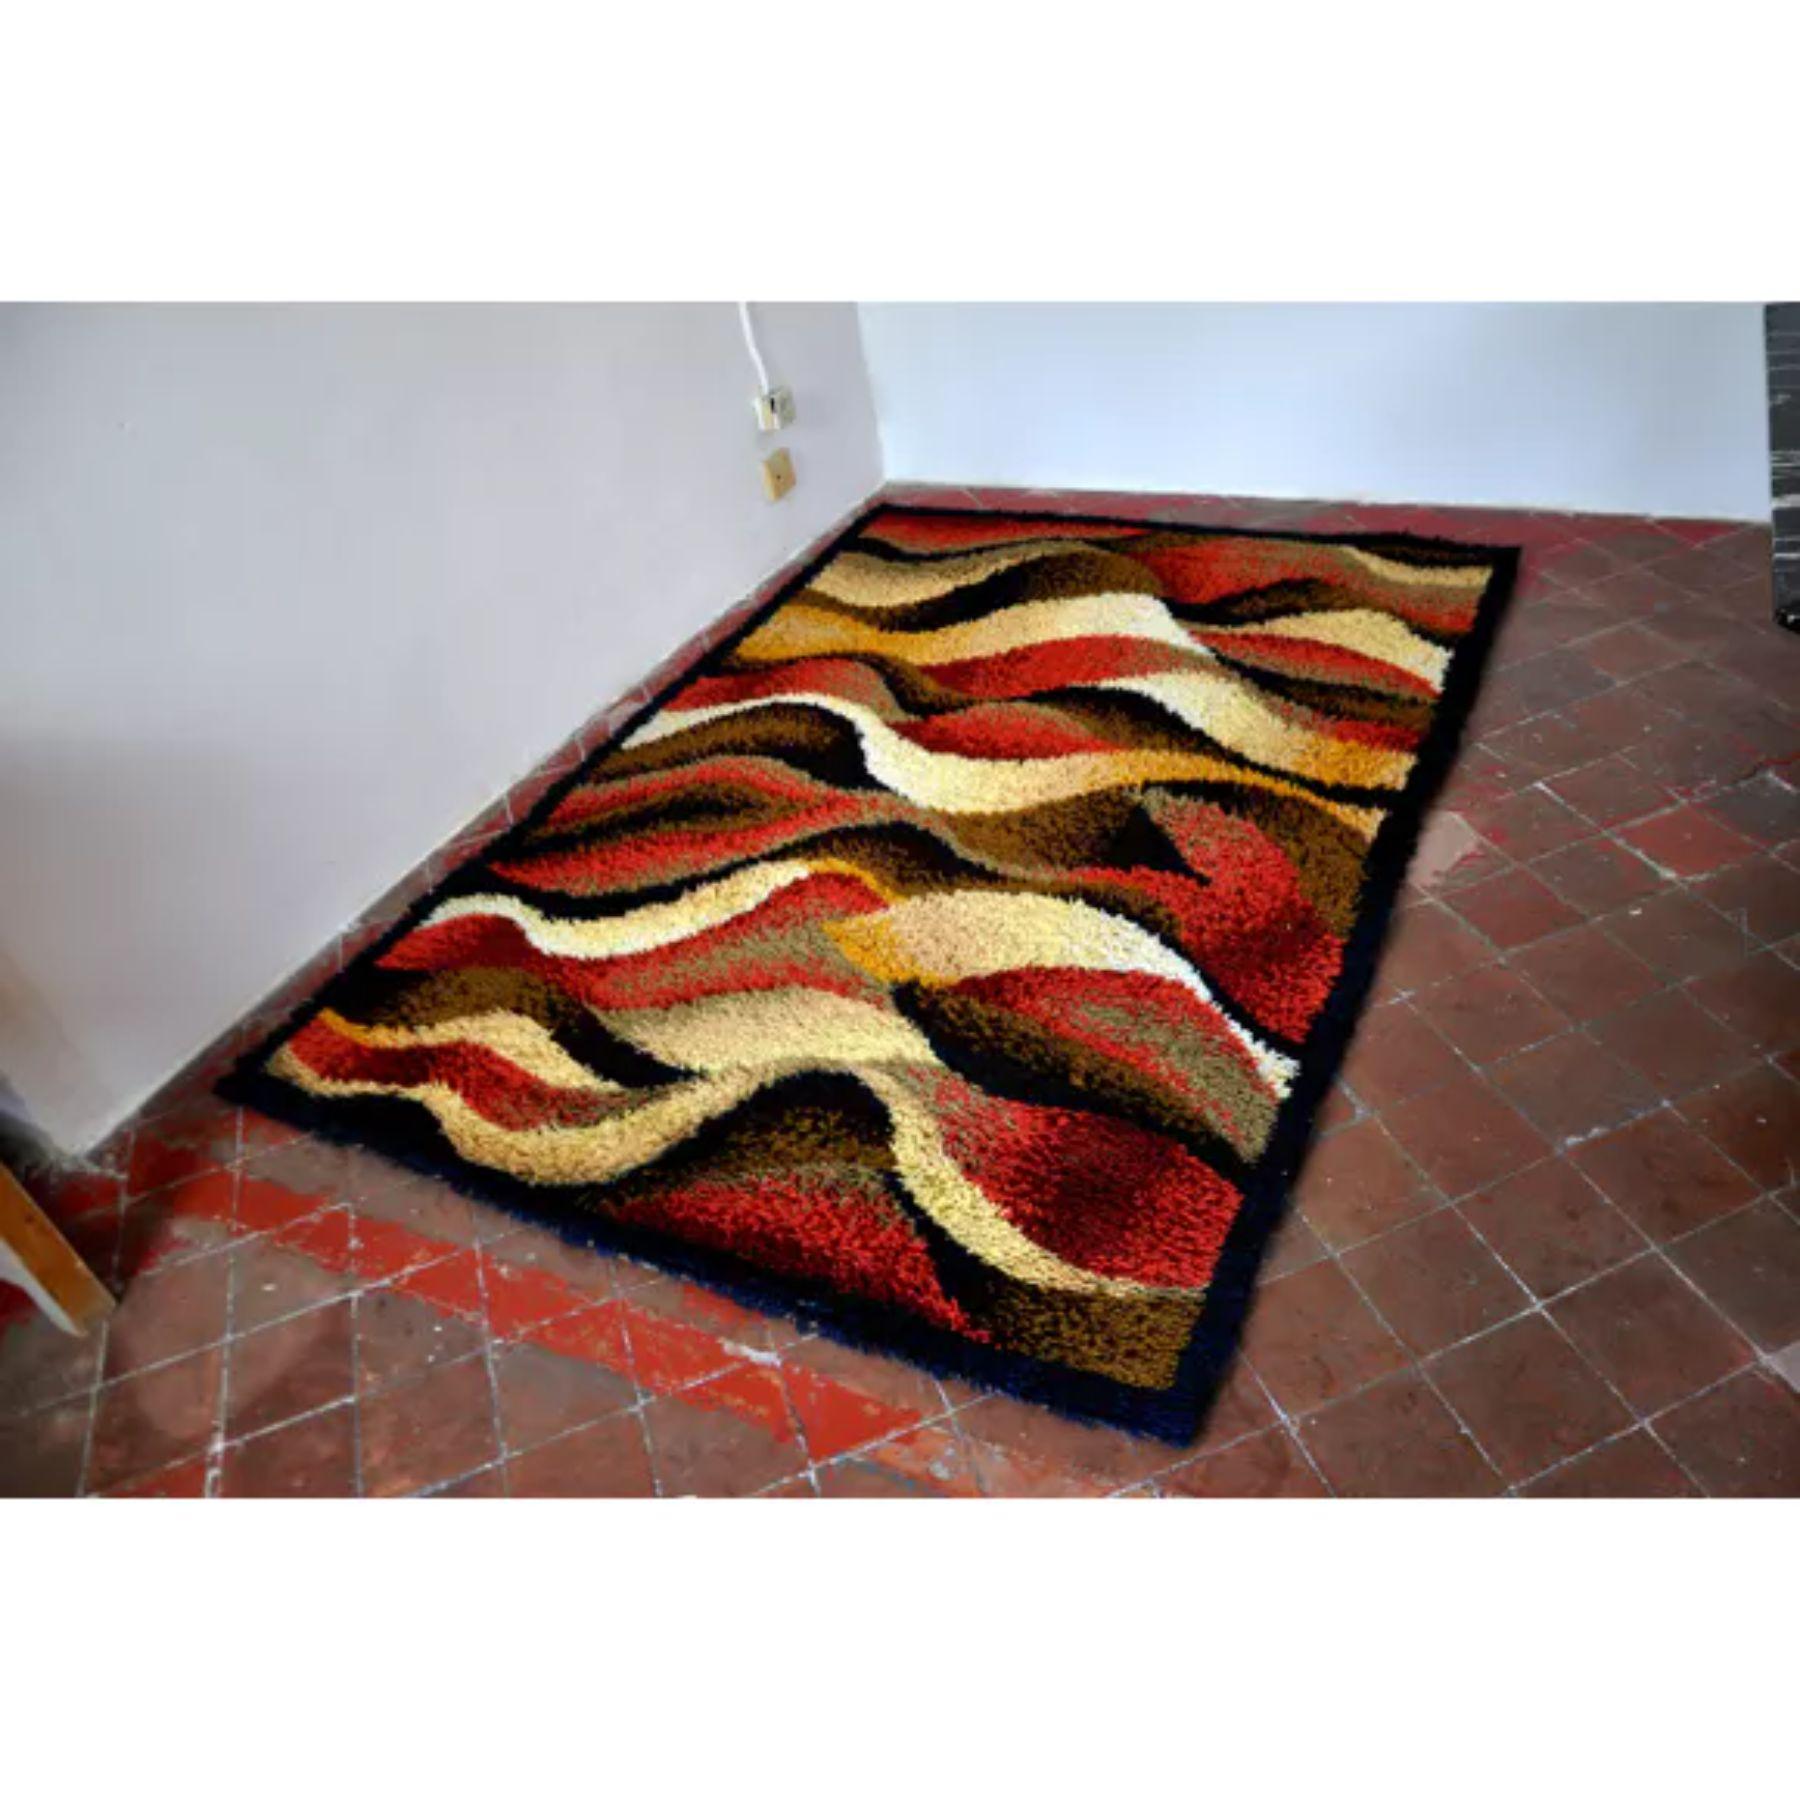 Rug from the famous Dutch brand desso, from the 70's. High quality 